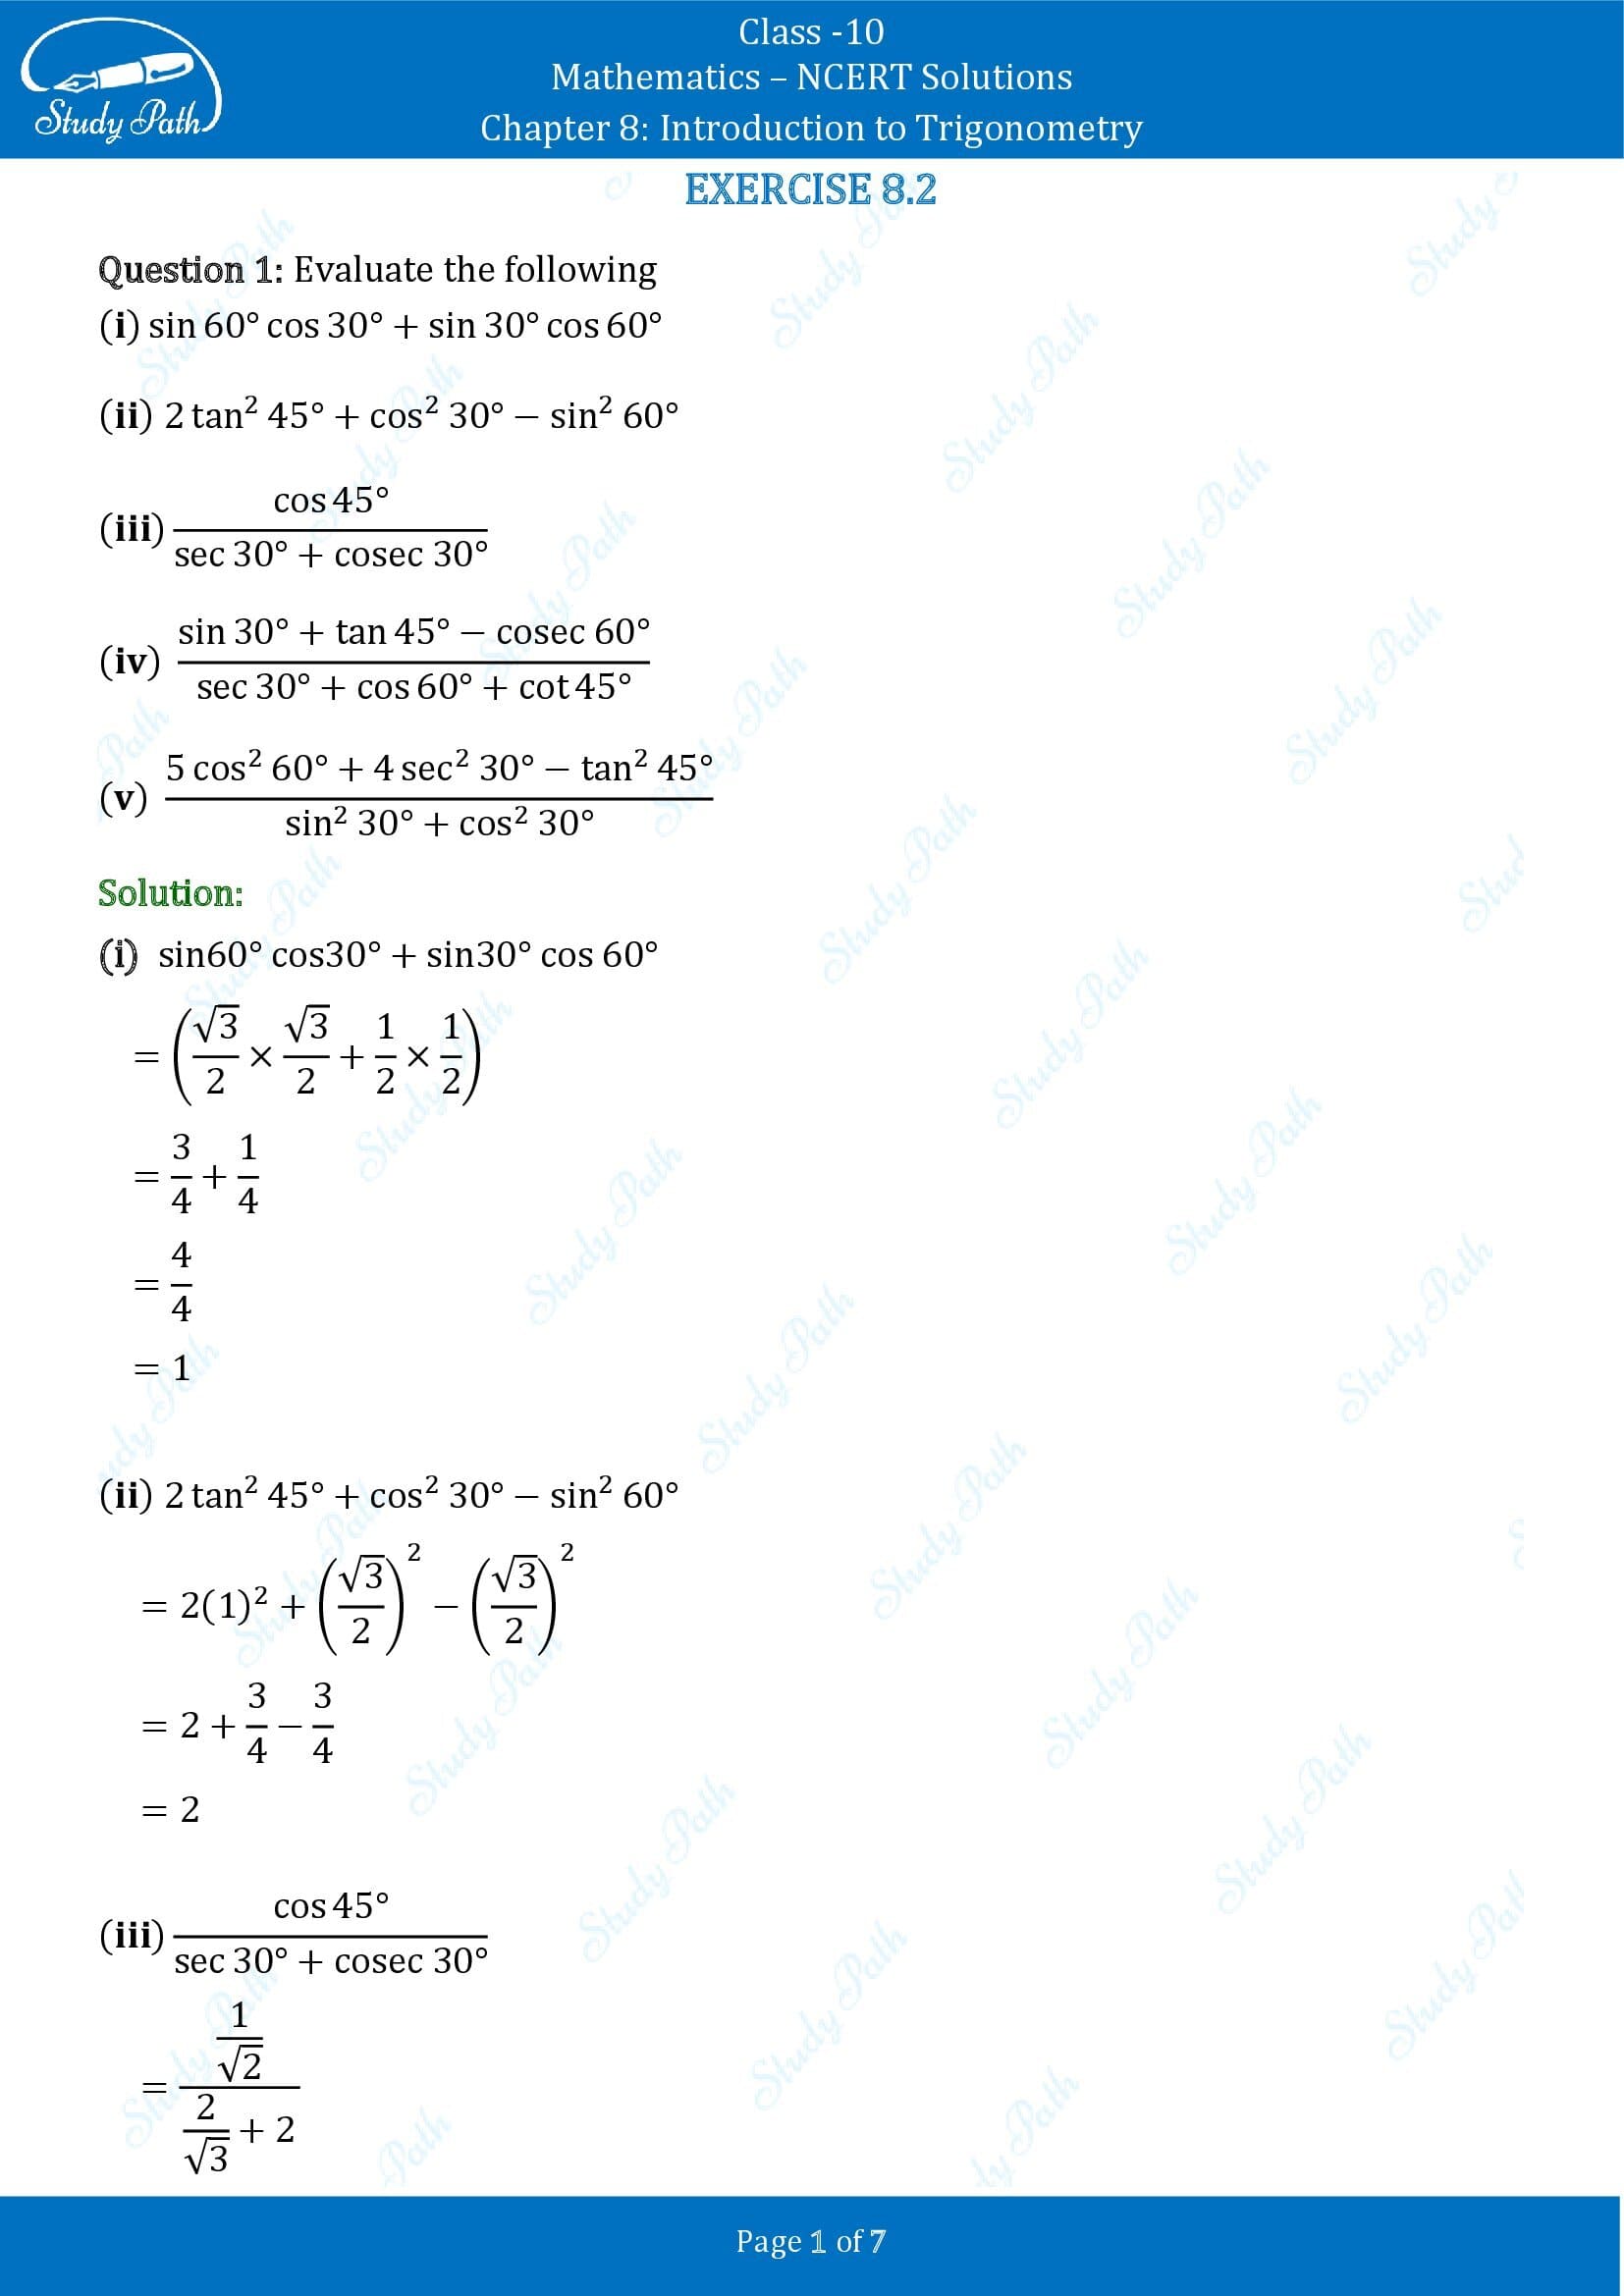 NCERT Solutions for Class 10 Maths Chapter 8 Introduction to Trigonometry Exercise 8.2 00001